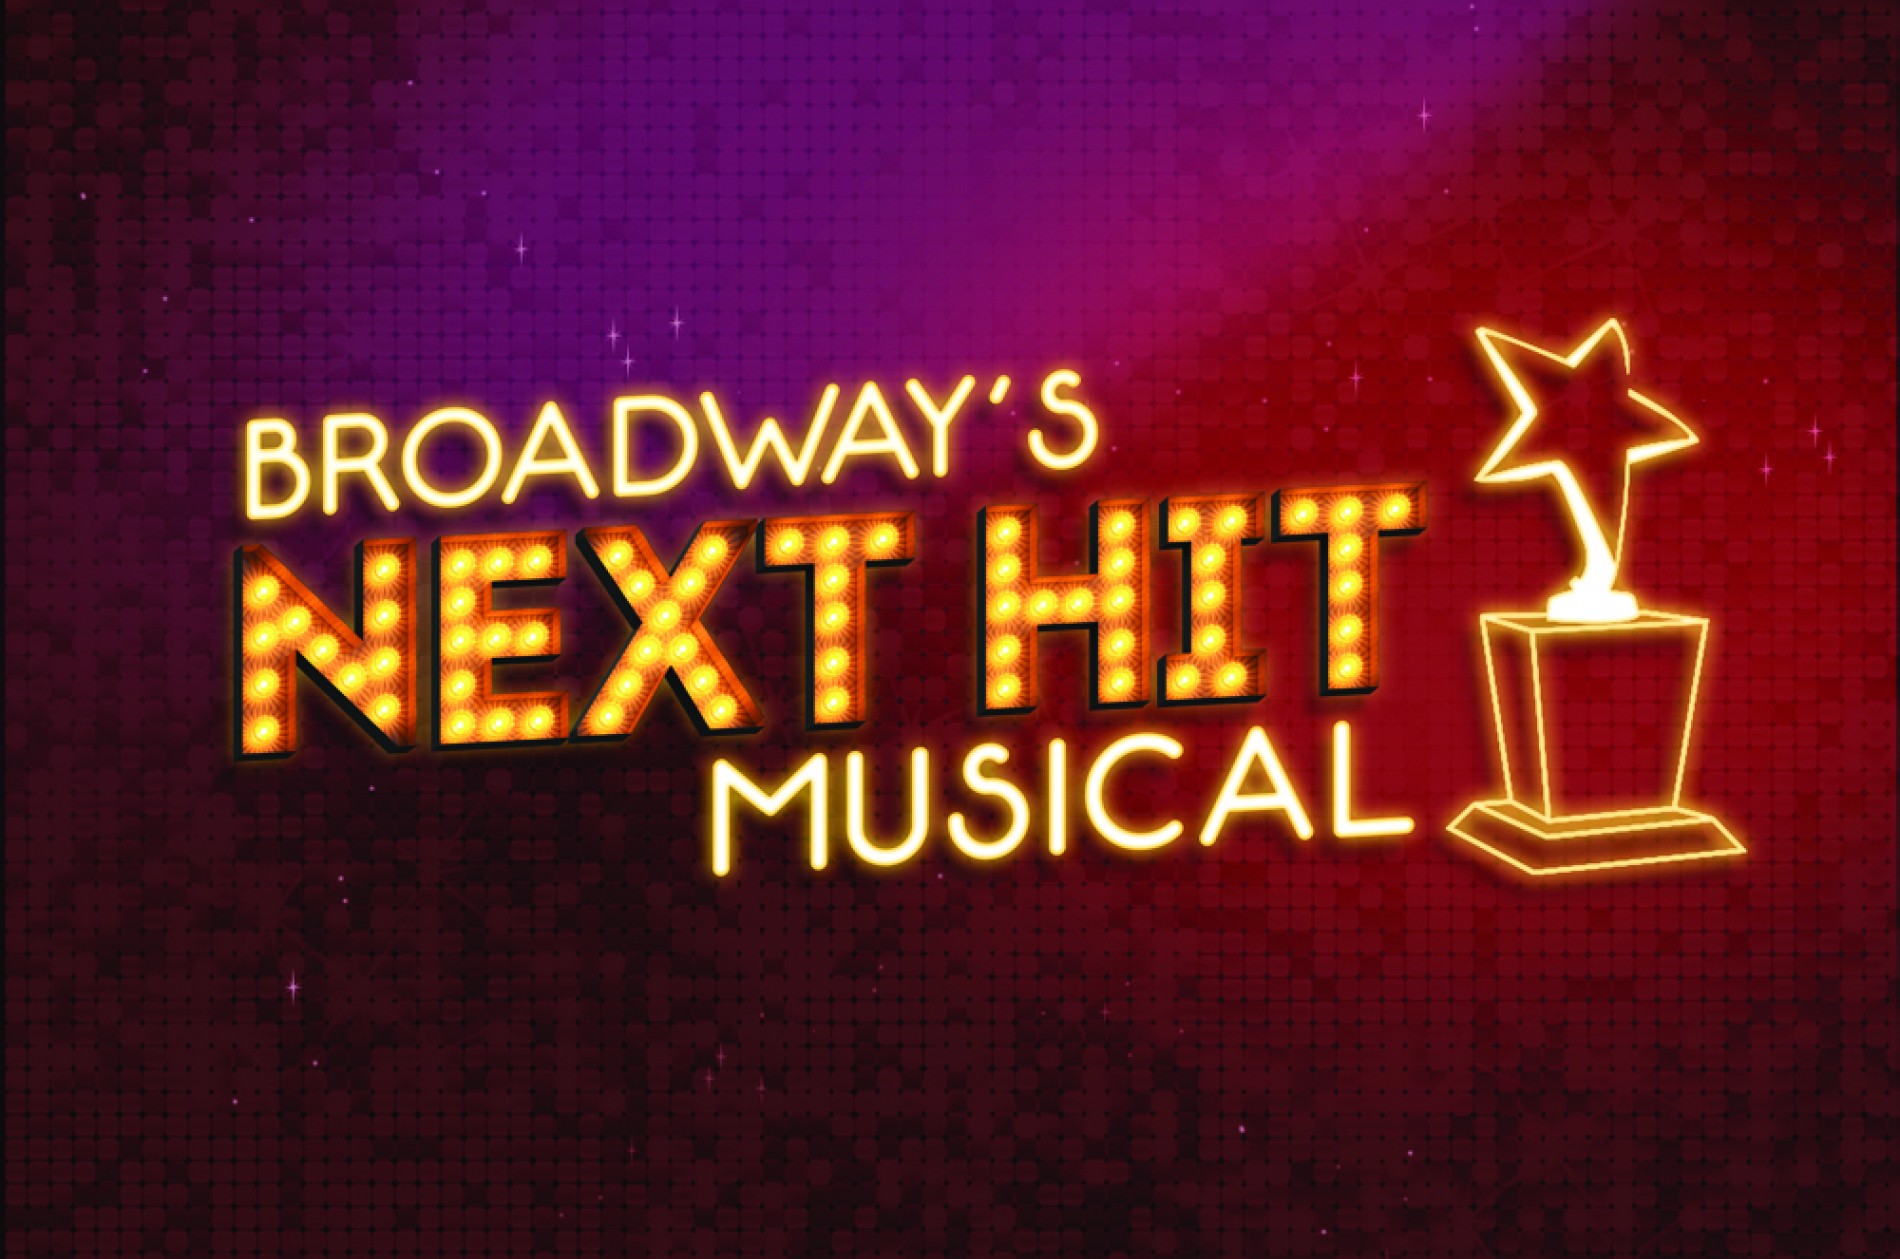 Broadway's Next Hit Musical words in gold on purple-to-red background